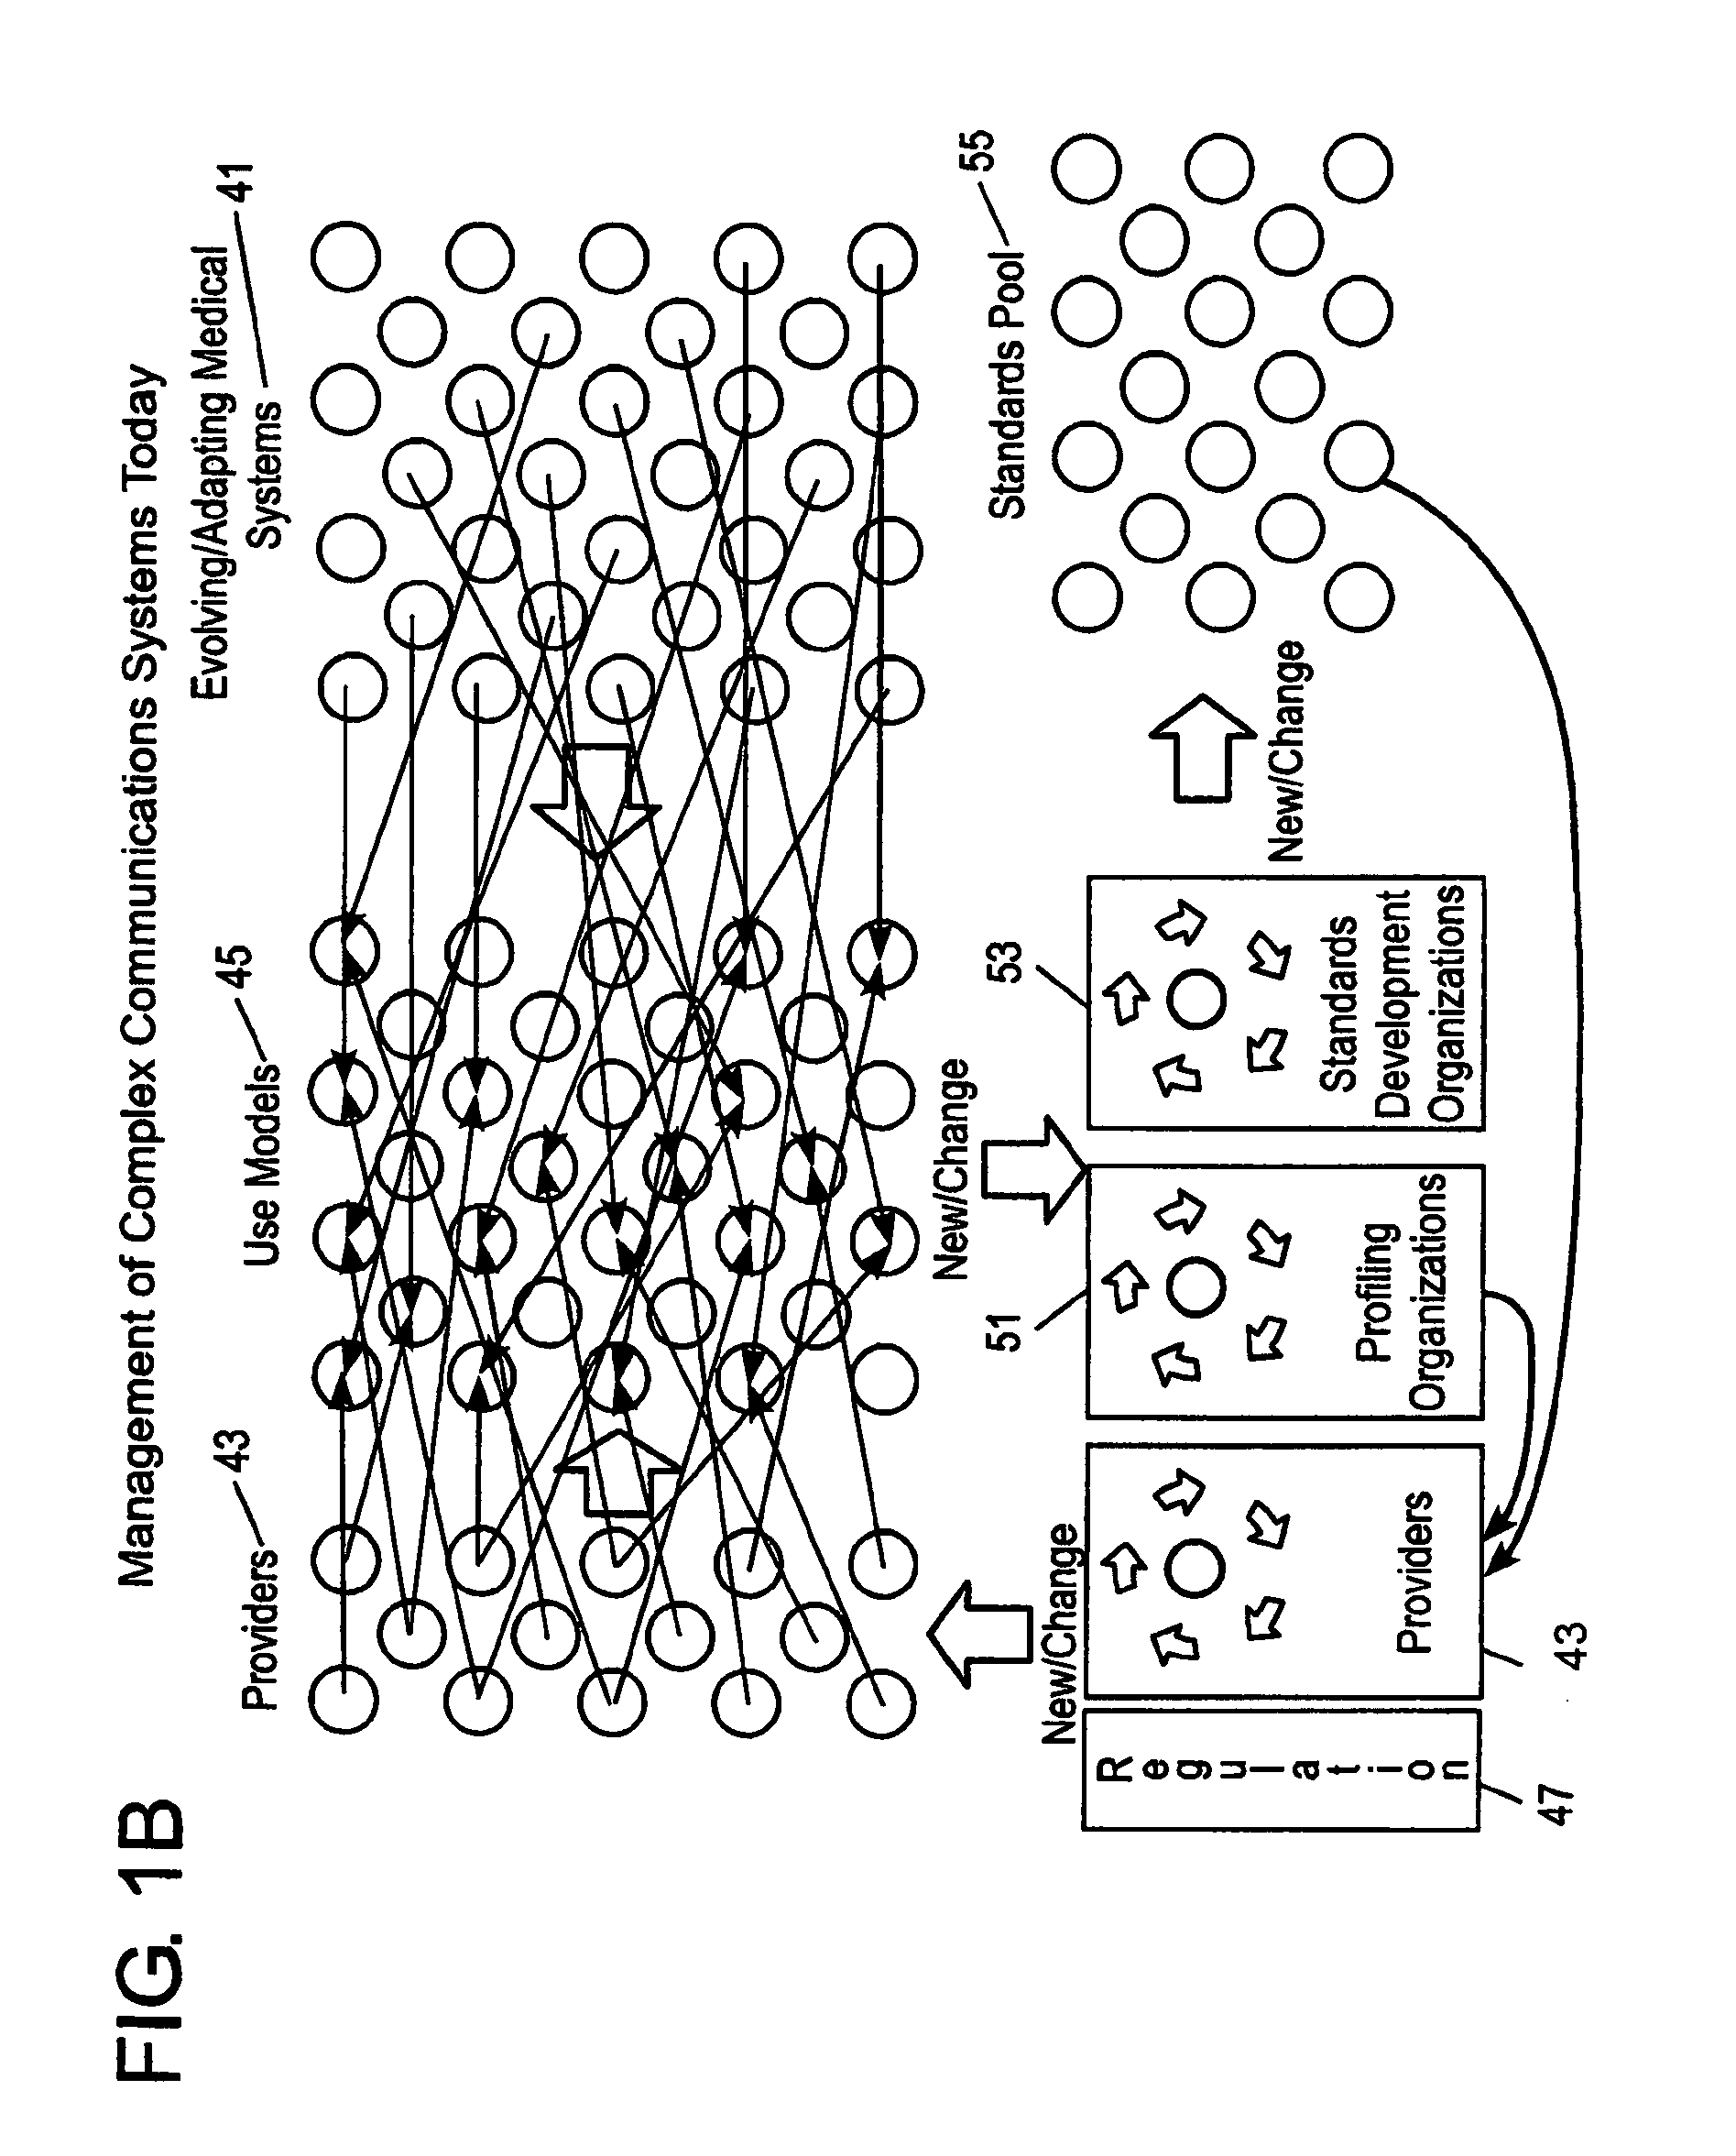 Device Data Sheets and Data Dictionaries for a Dynamic Medical Object Information Base